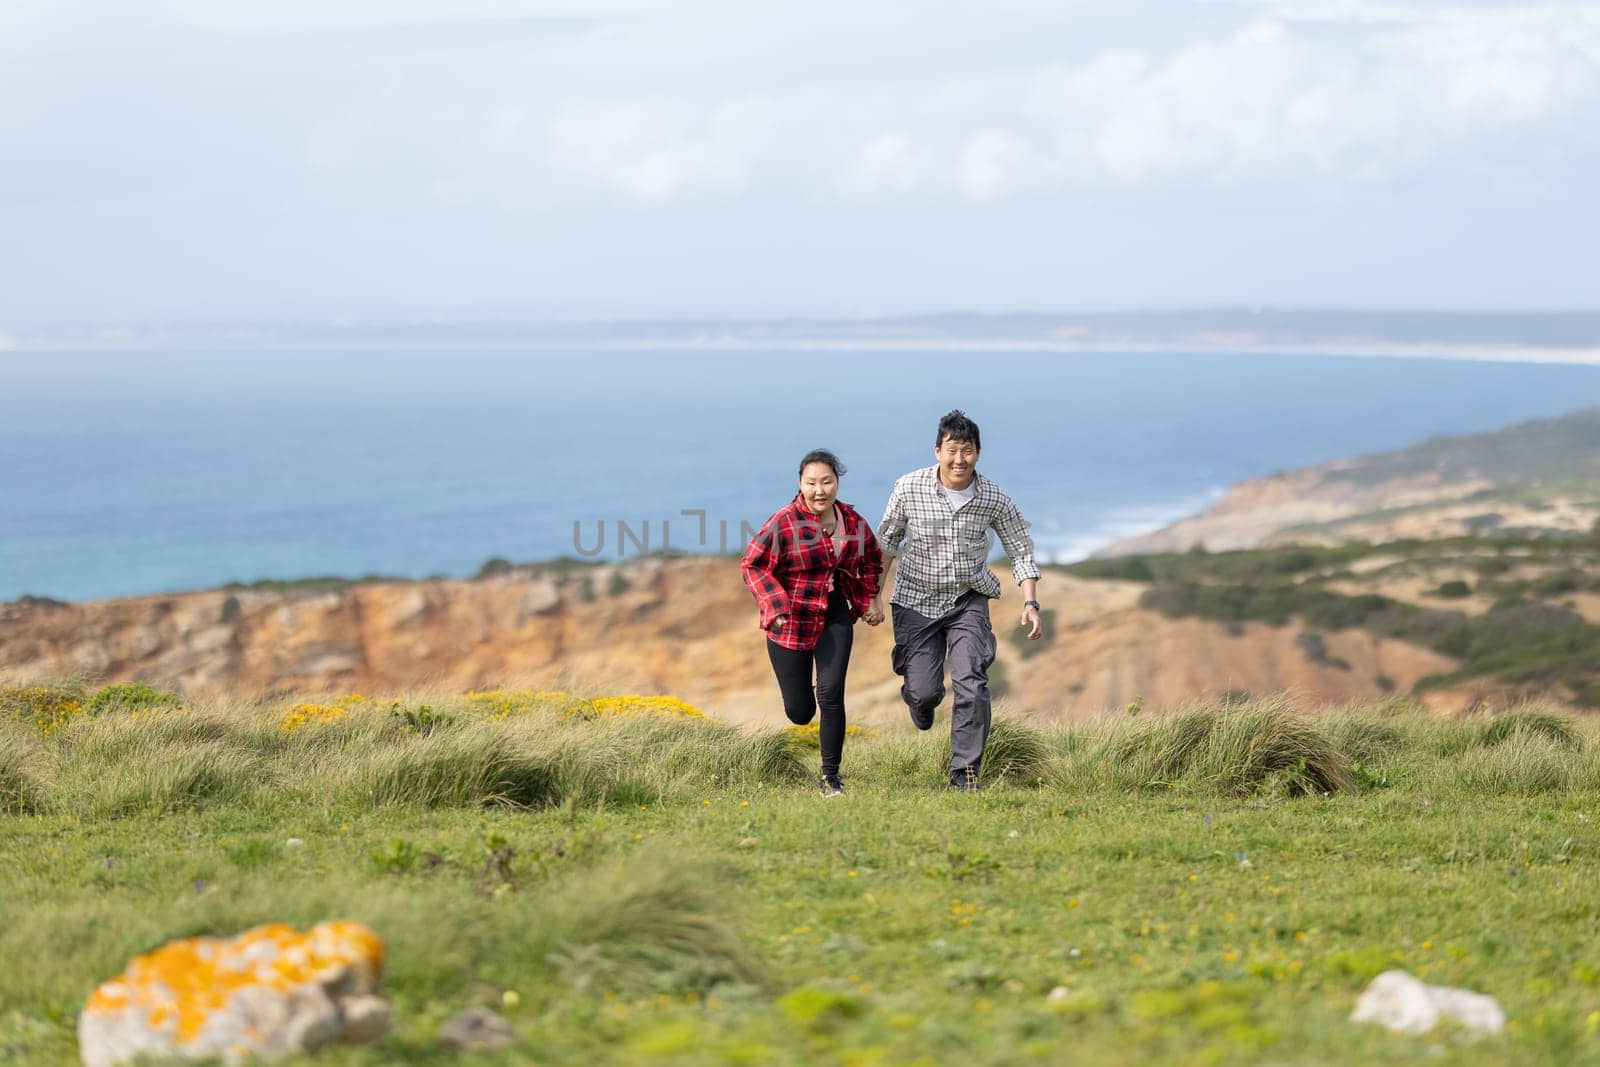 A couple running on a grassy hill overlooking the ocean by Studia72